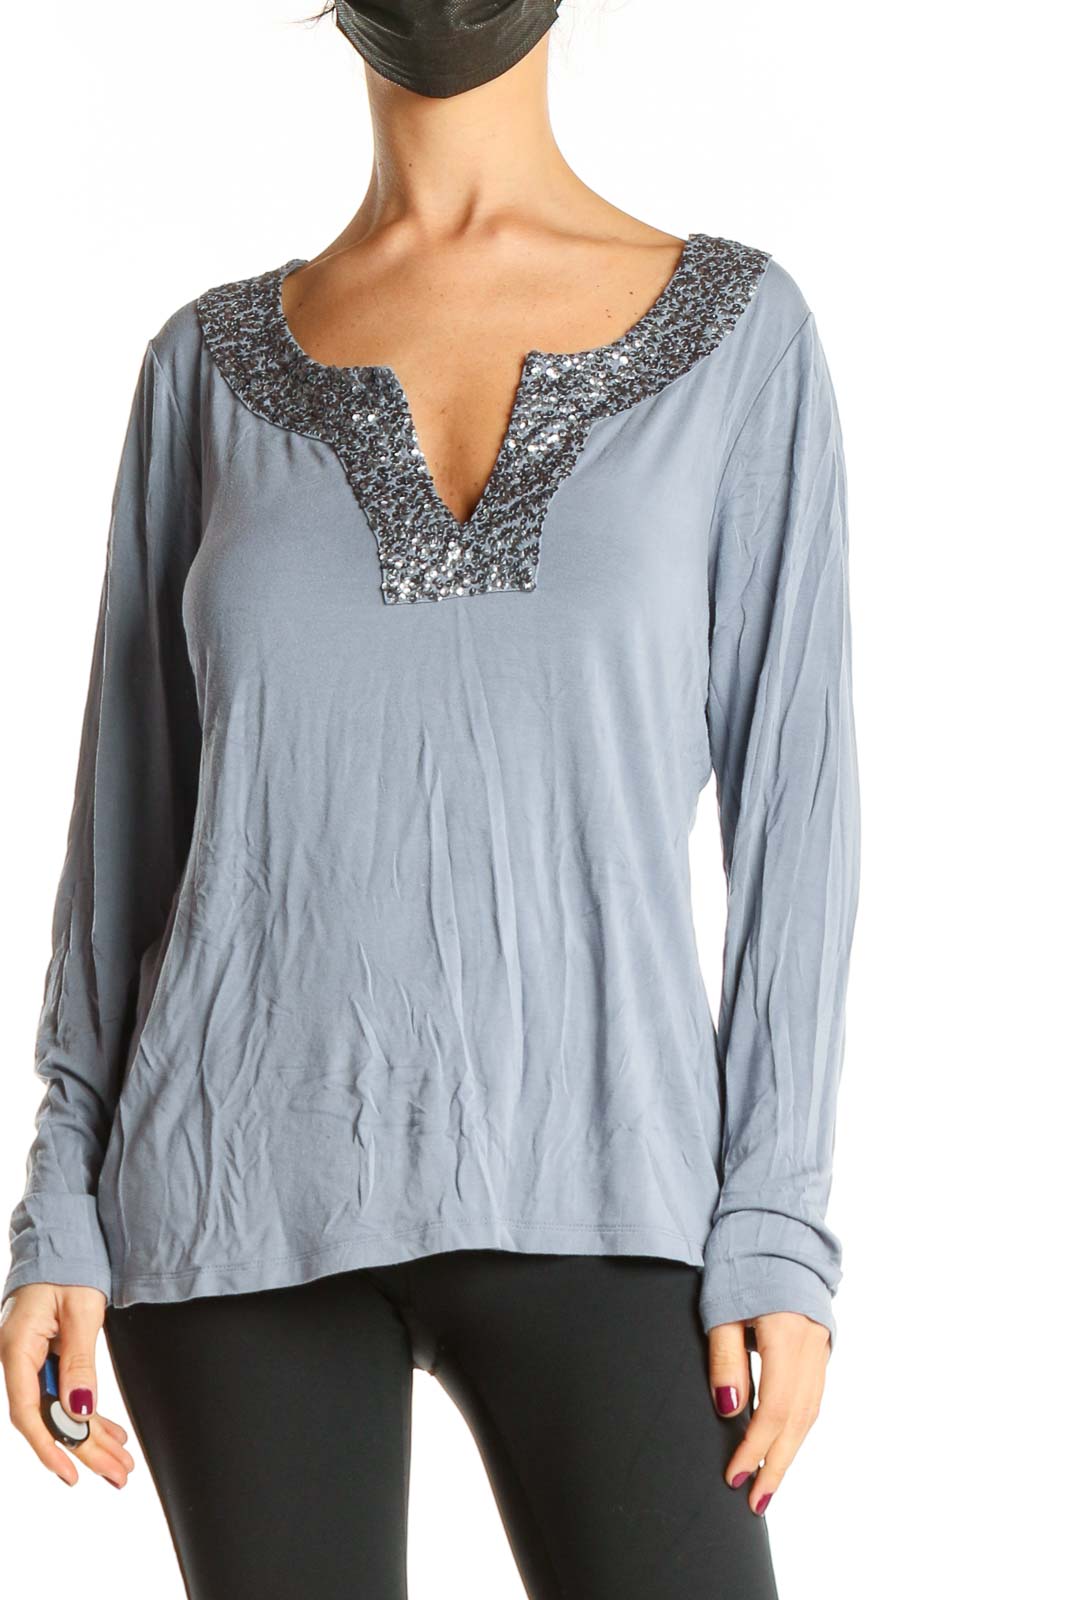 Gray Sequin All Day Wear Top Front